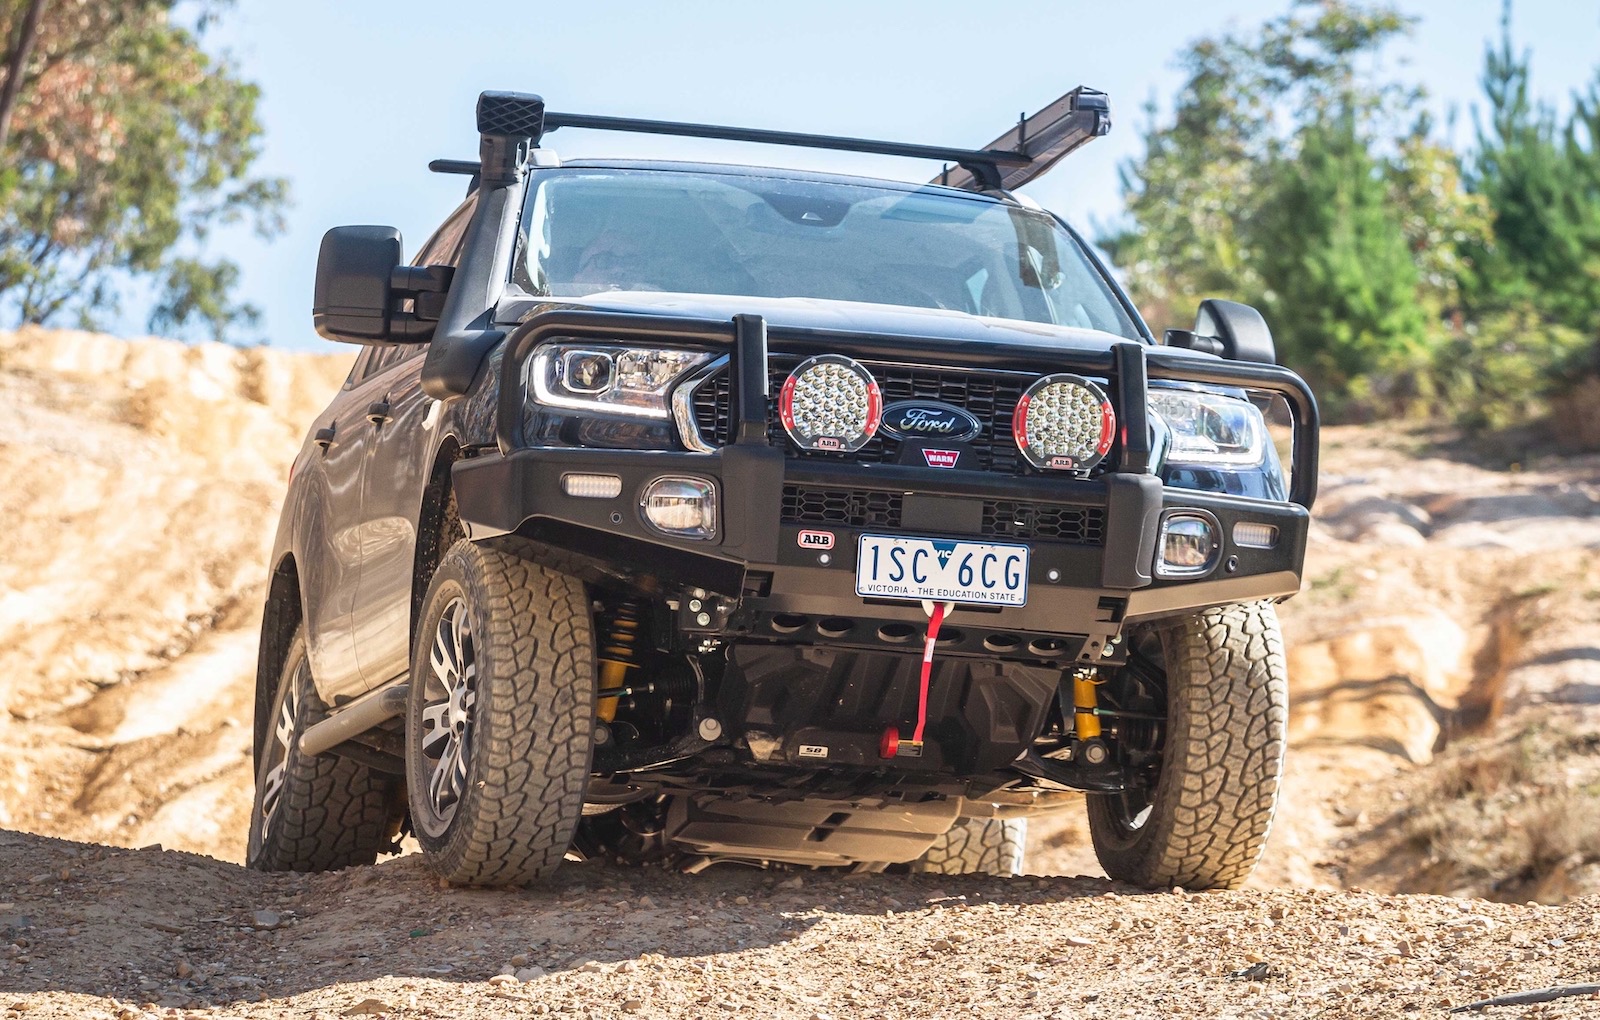 Ford Australia teams up with ARB for Ranger & Everest accessories